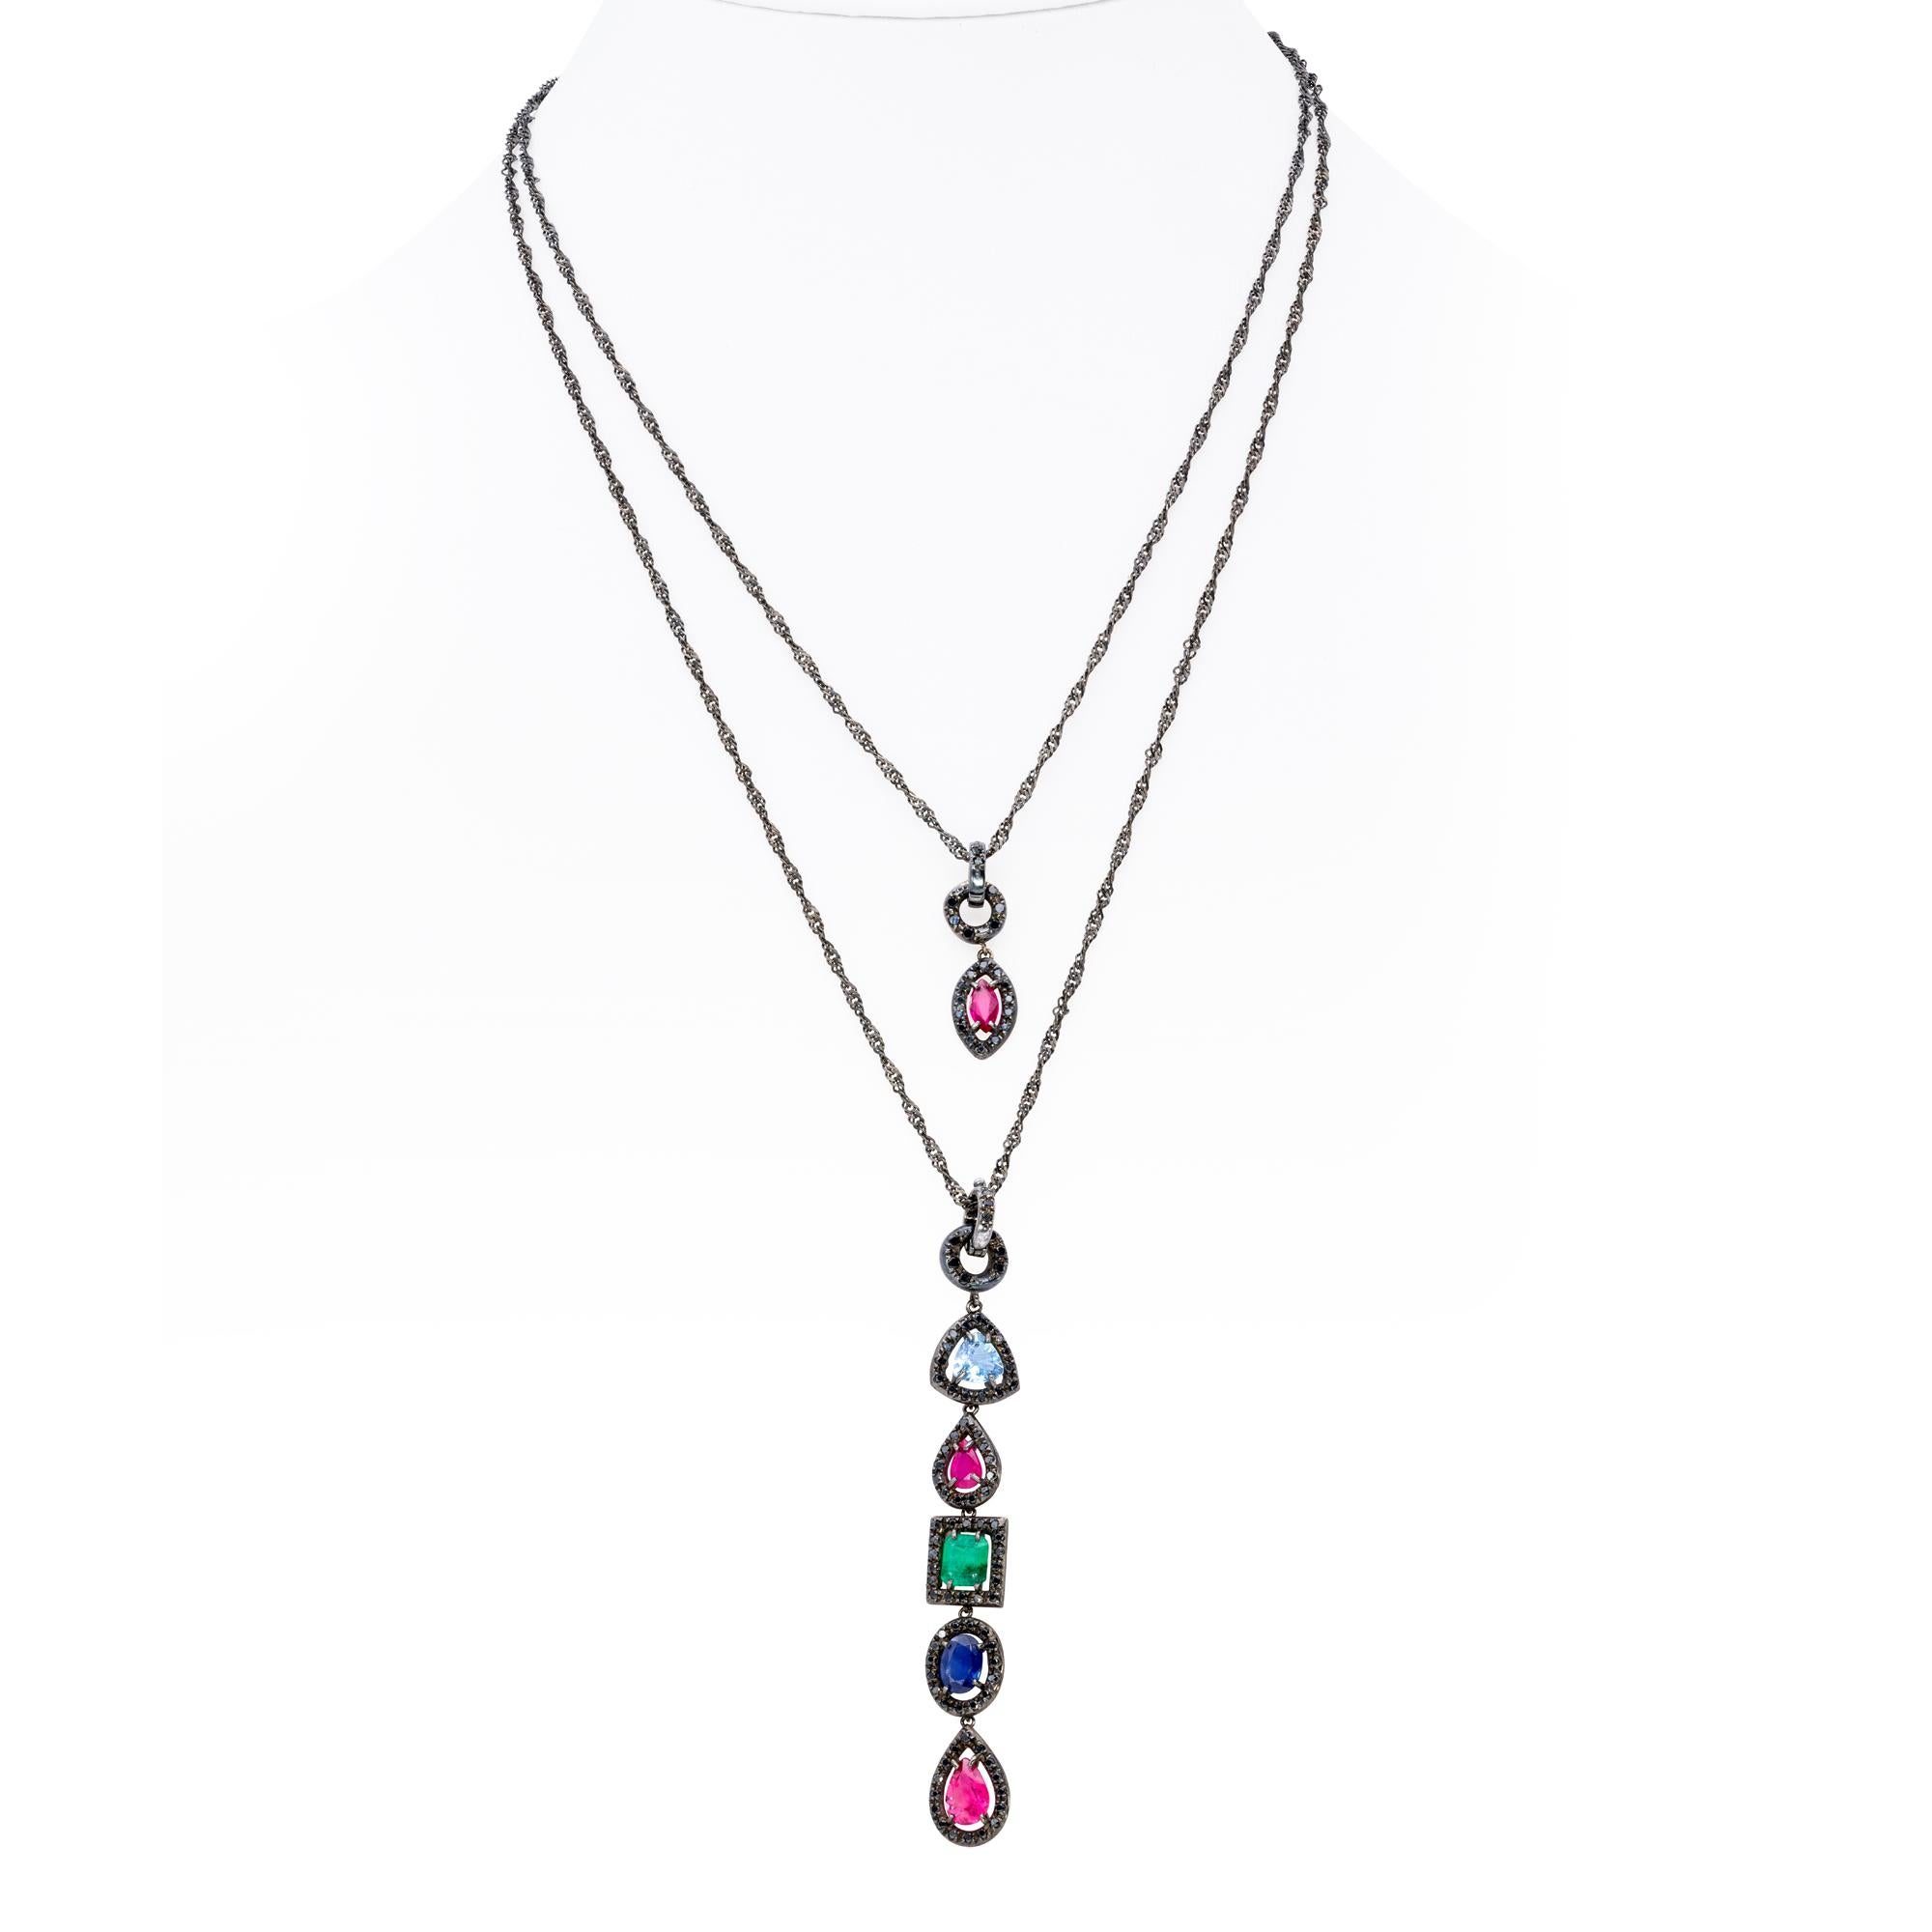 A Pair of Pendants in Precious Stones and Black Diamonds set on 18 kt gold from d'Avossa Rainbow Collection
Those two asimmetric Pendants are made with Rubies, Emerald, Sapphires and Aquamarine in different cuts set with a frame of Black